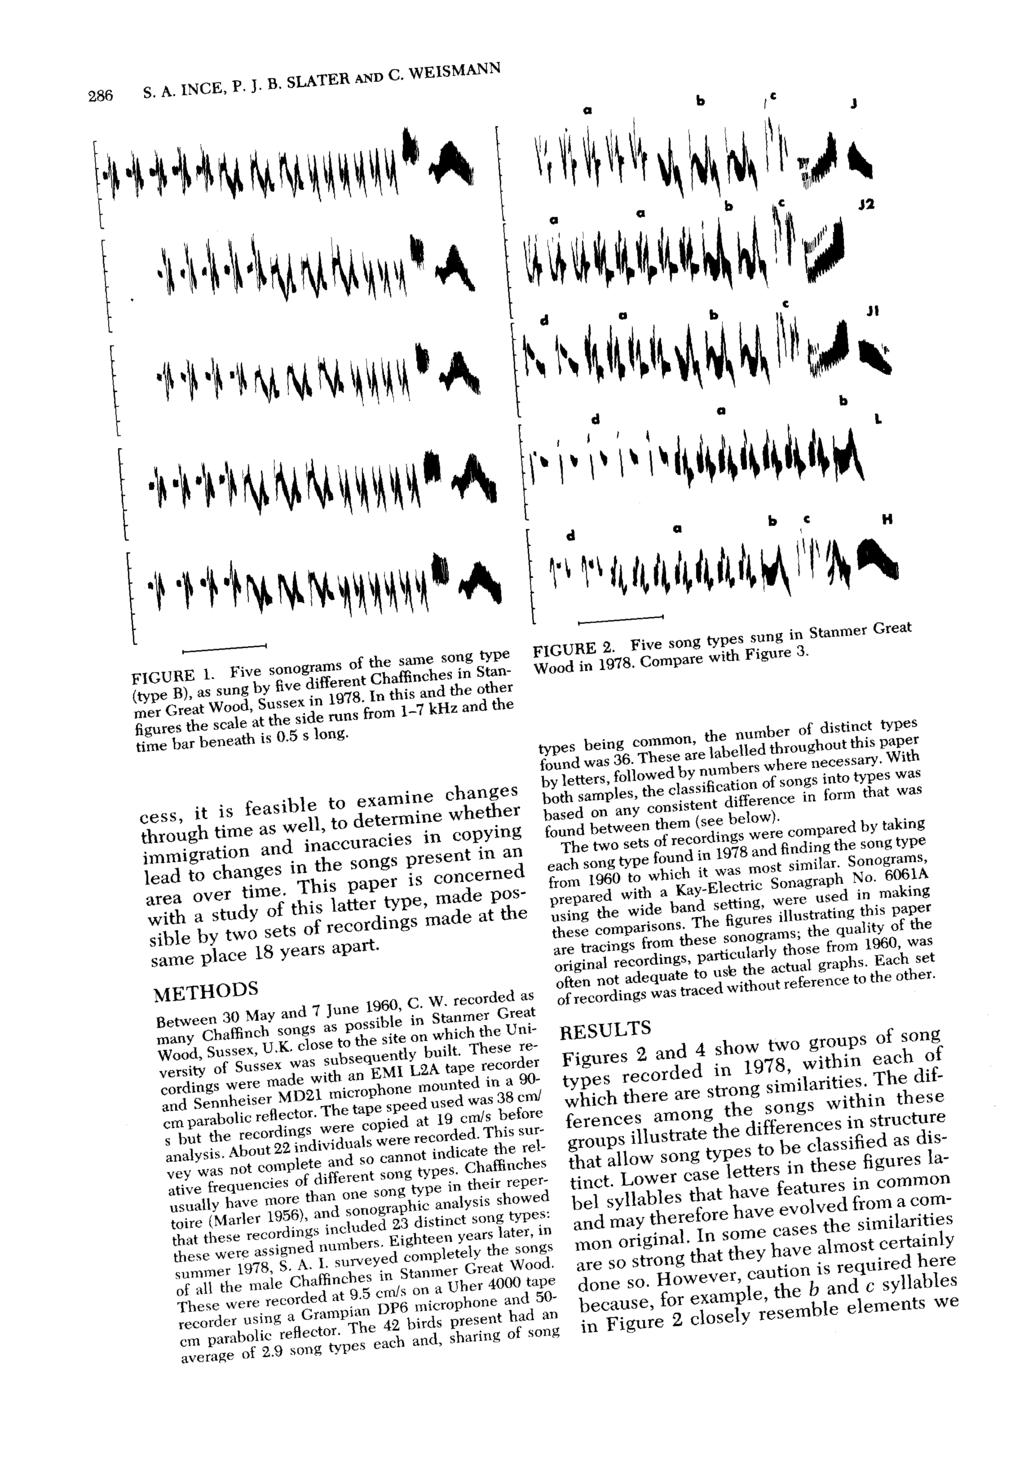 286 S. A. INCE, P. J. B. SLATER AND C. WEISMANN L r d a b 1 5 4 FIGURE 1. Five sonograms of the same song type (type B), as sung by five different Chaffinches in Stanmer Great Wood, Sussex in 1978.